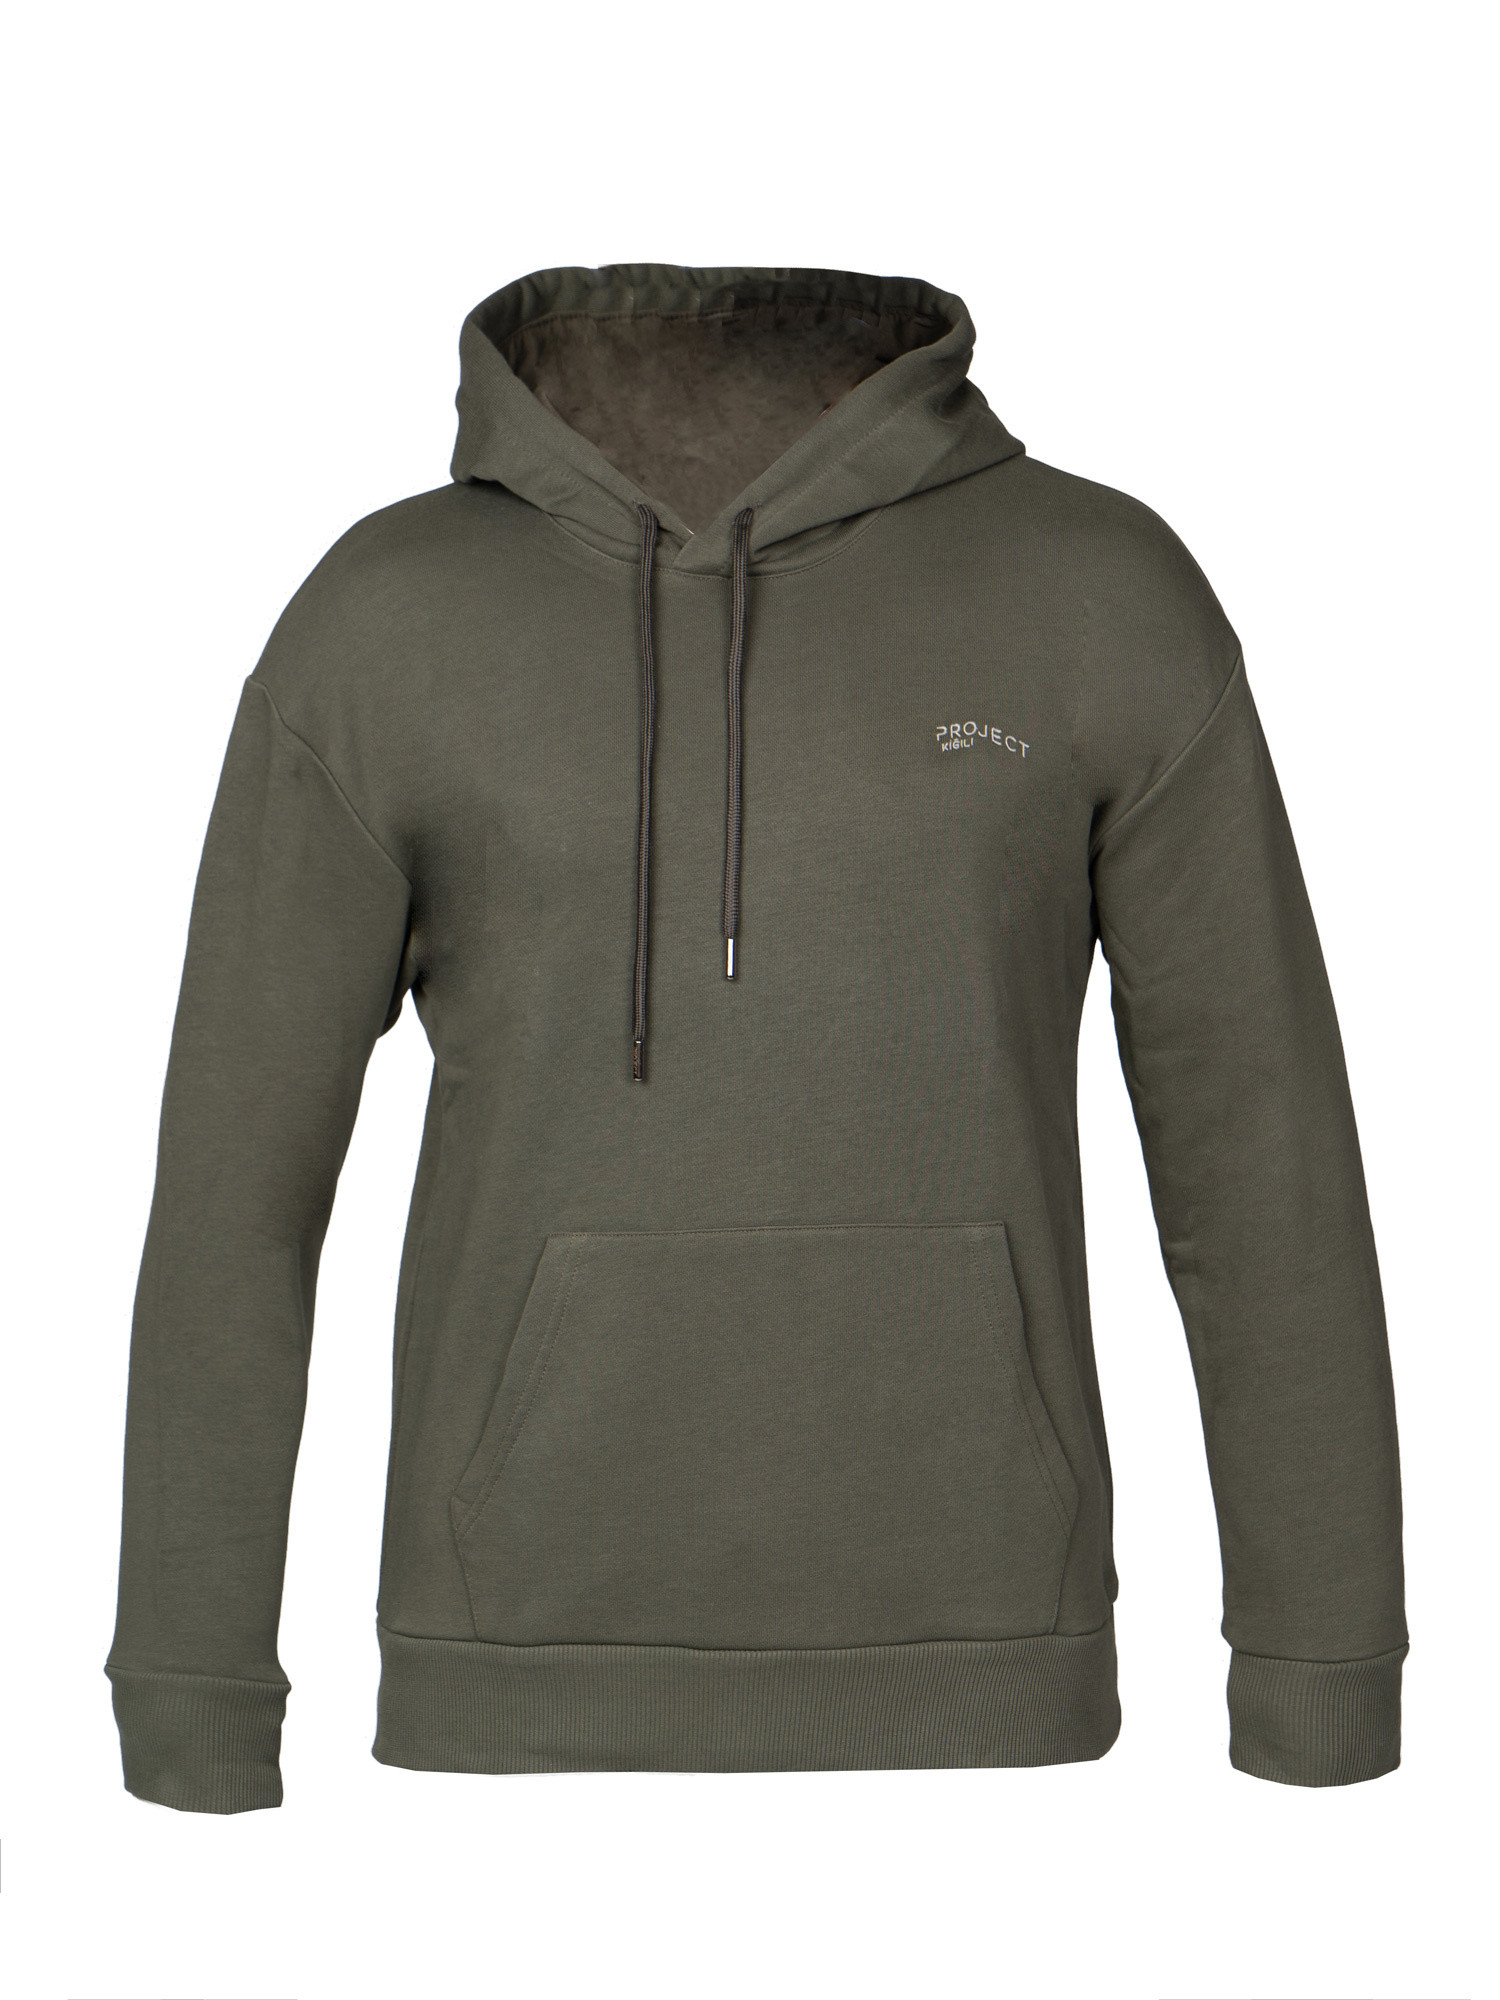 Project hooded sweatshirt, Olive Green, large image number 0